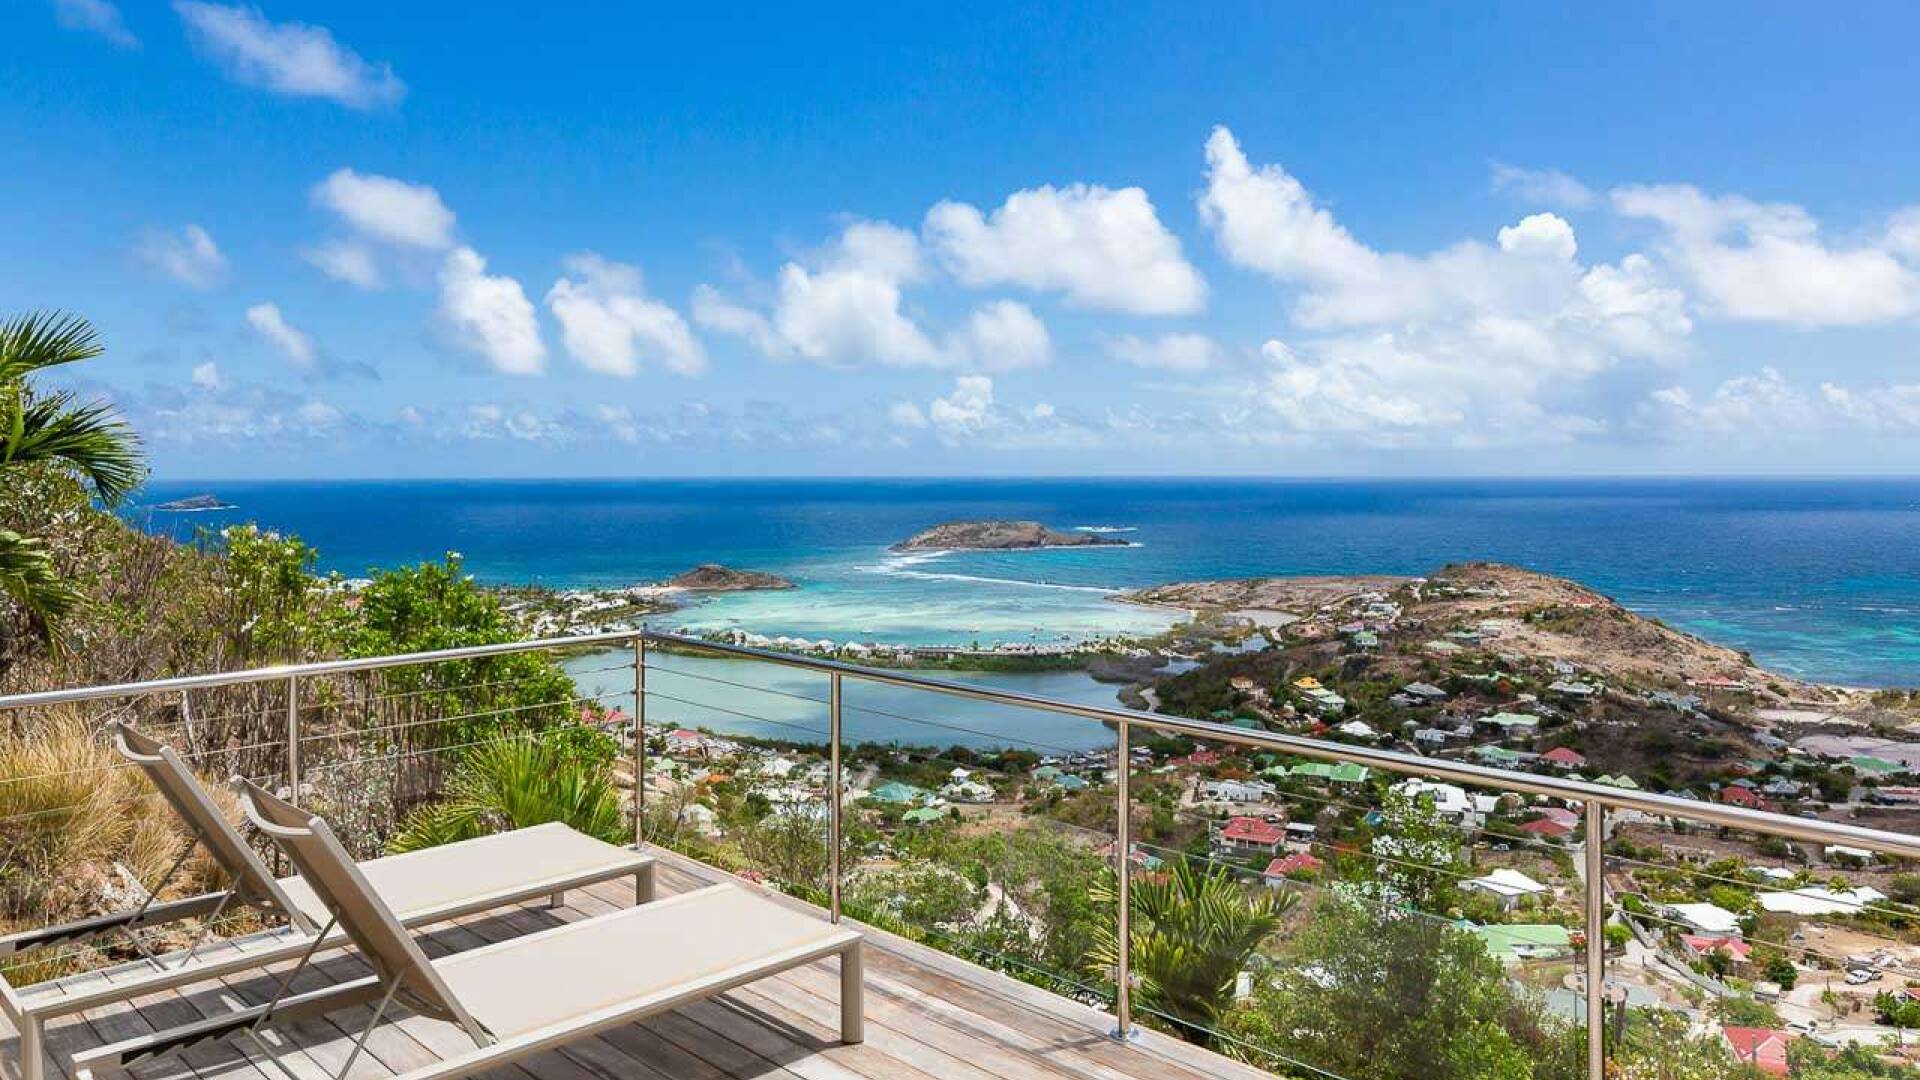 The view from WV ZUL, Vitet, St. Barthelemy